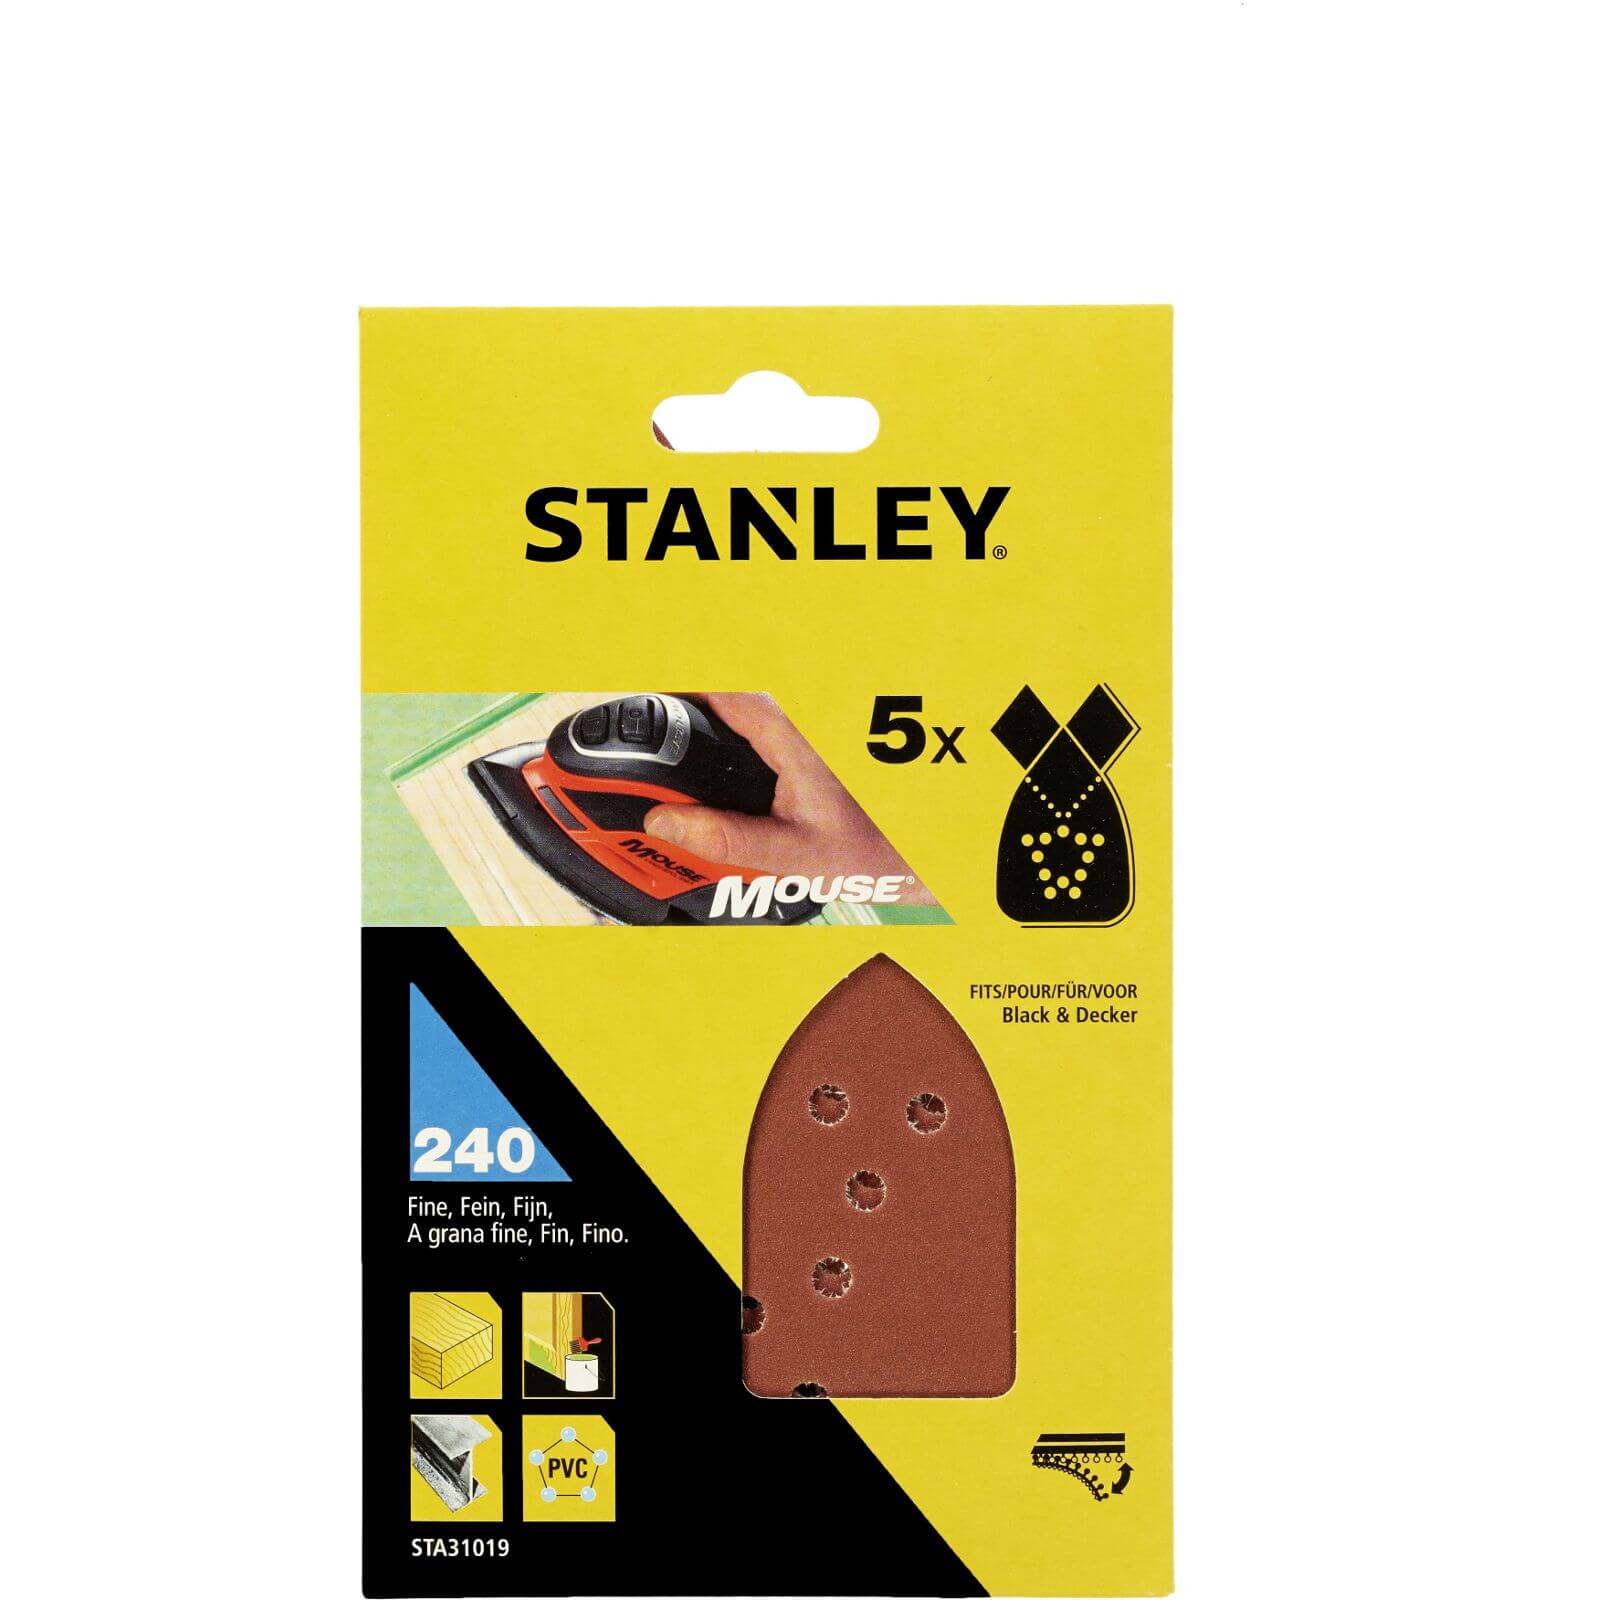 Photo of Stanley Mouse Sanding Sheets - 240g - Sta31019-xj